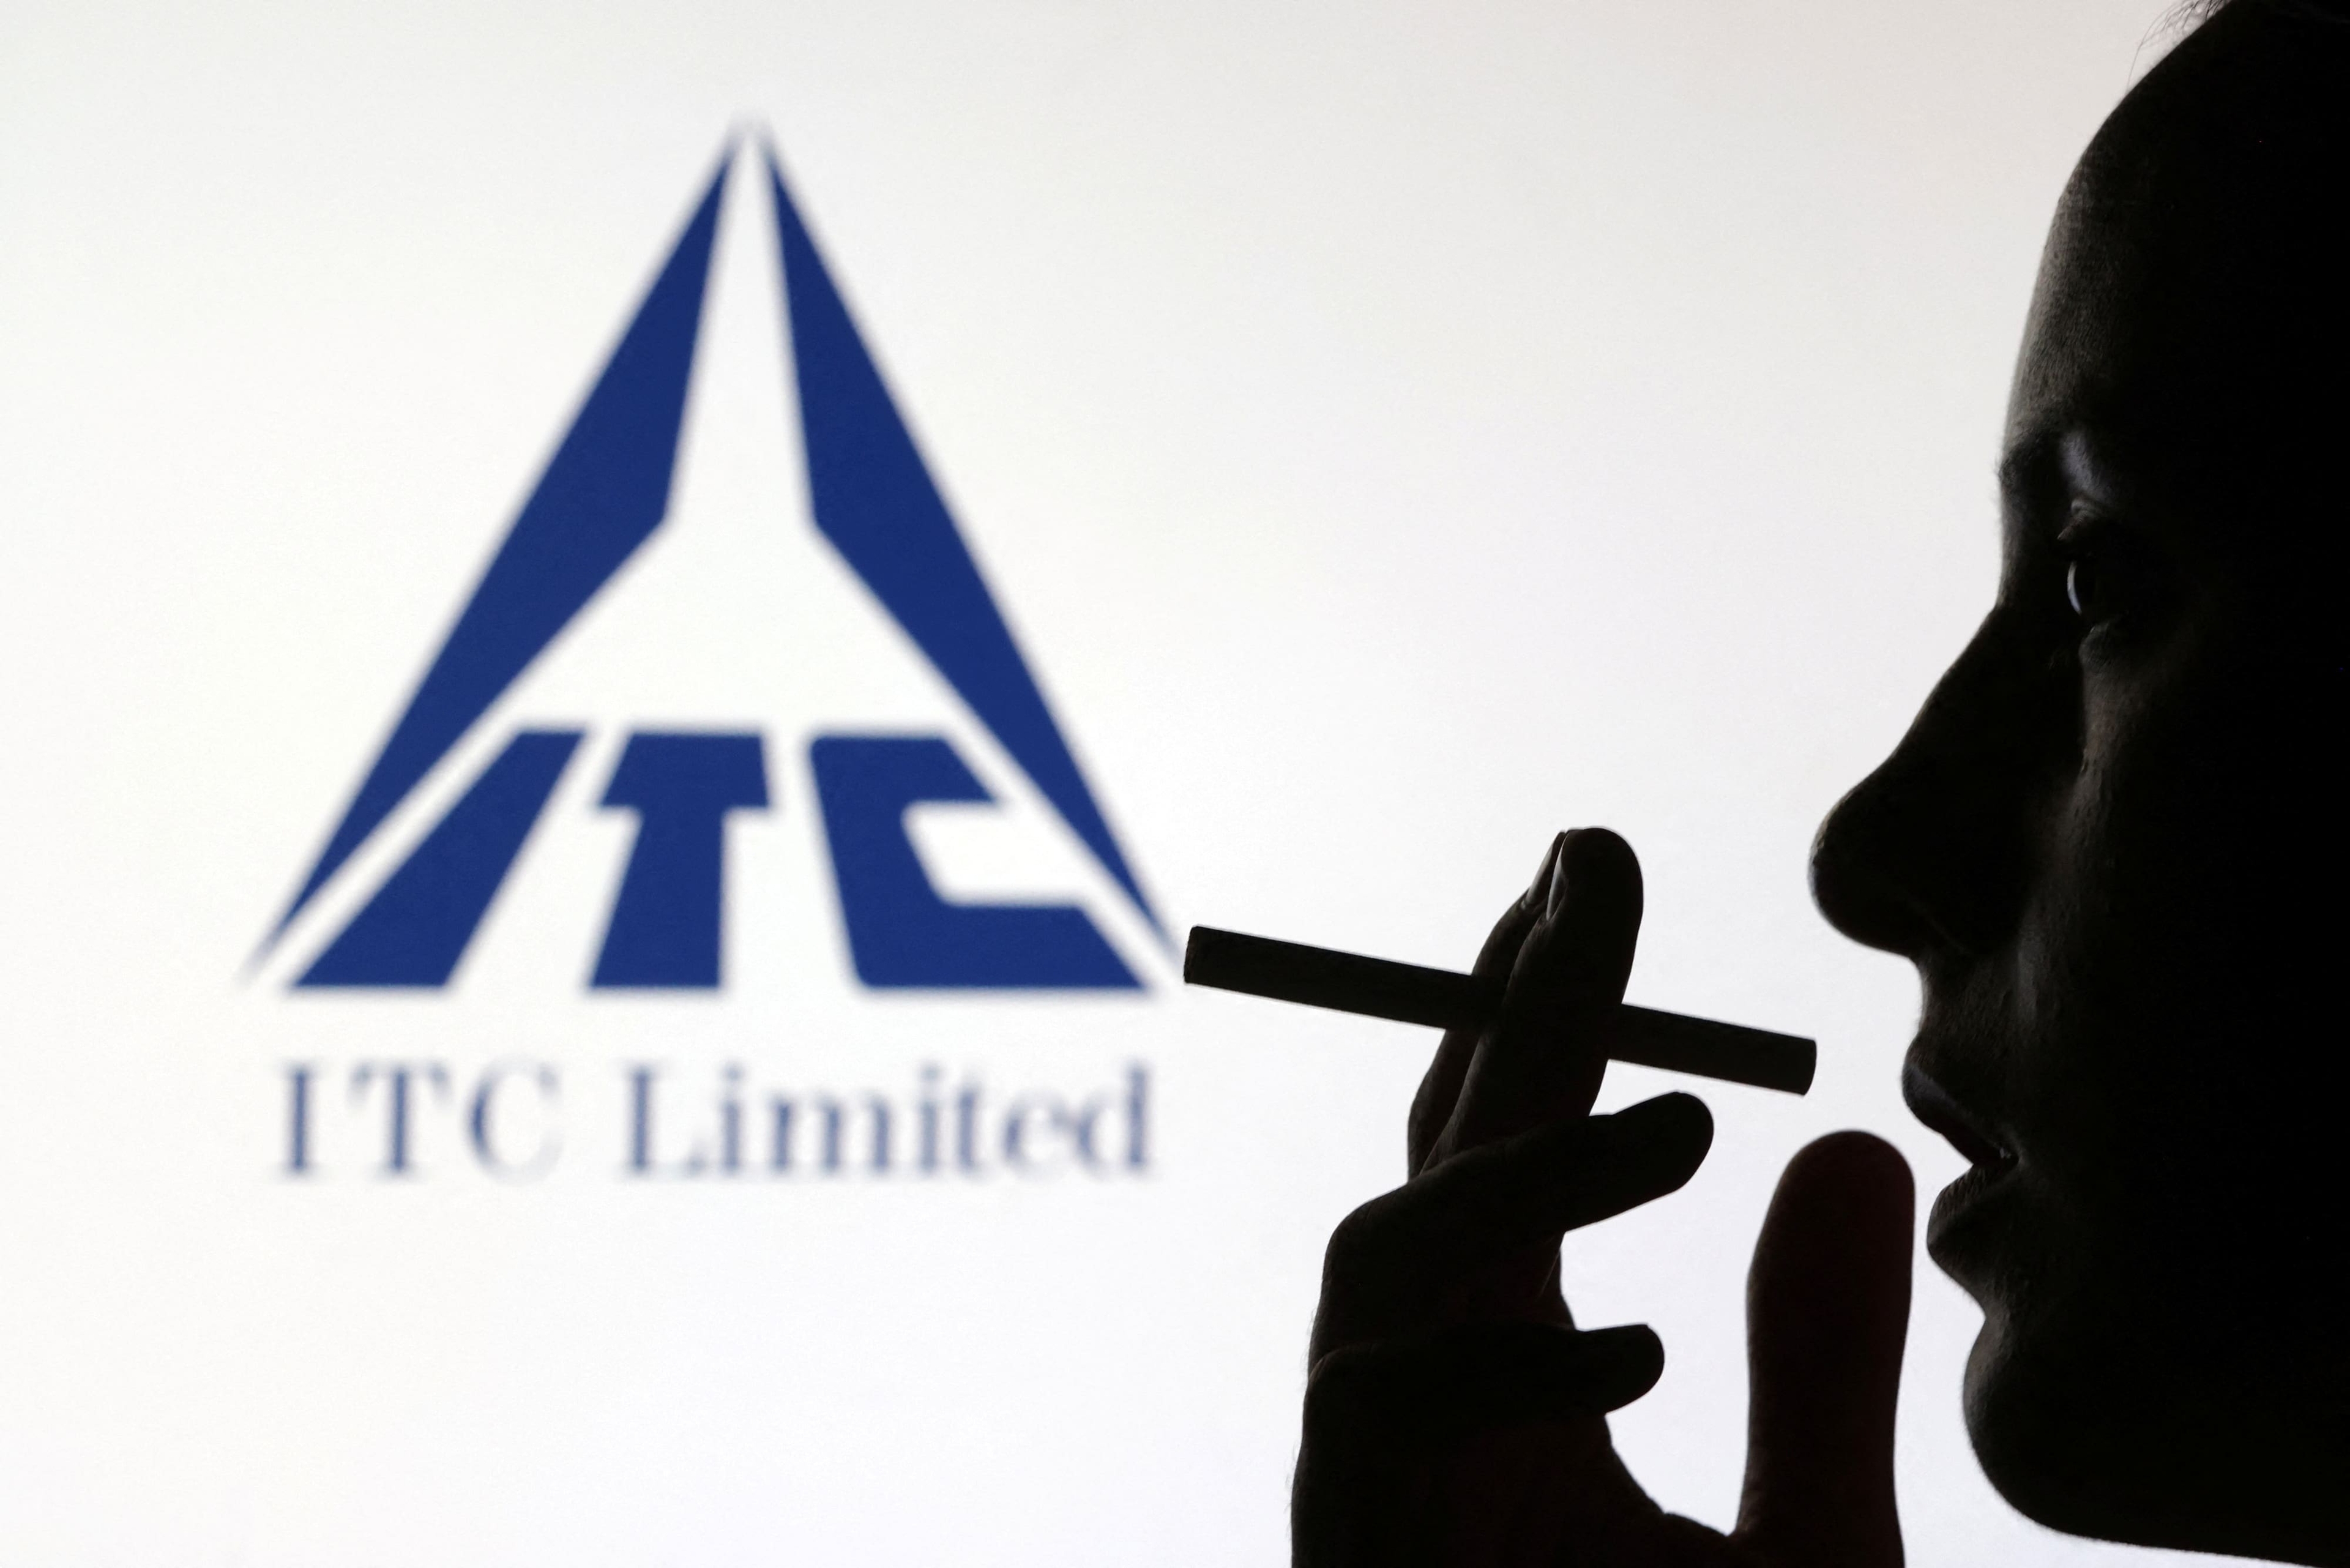 A woman poses with a cigarette in front of ITC Limited logo in this illustration taken July 26, 2022. REUTERS/Dado Ruvic/Illustration